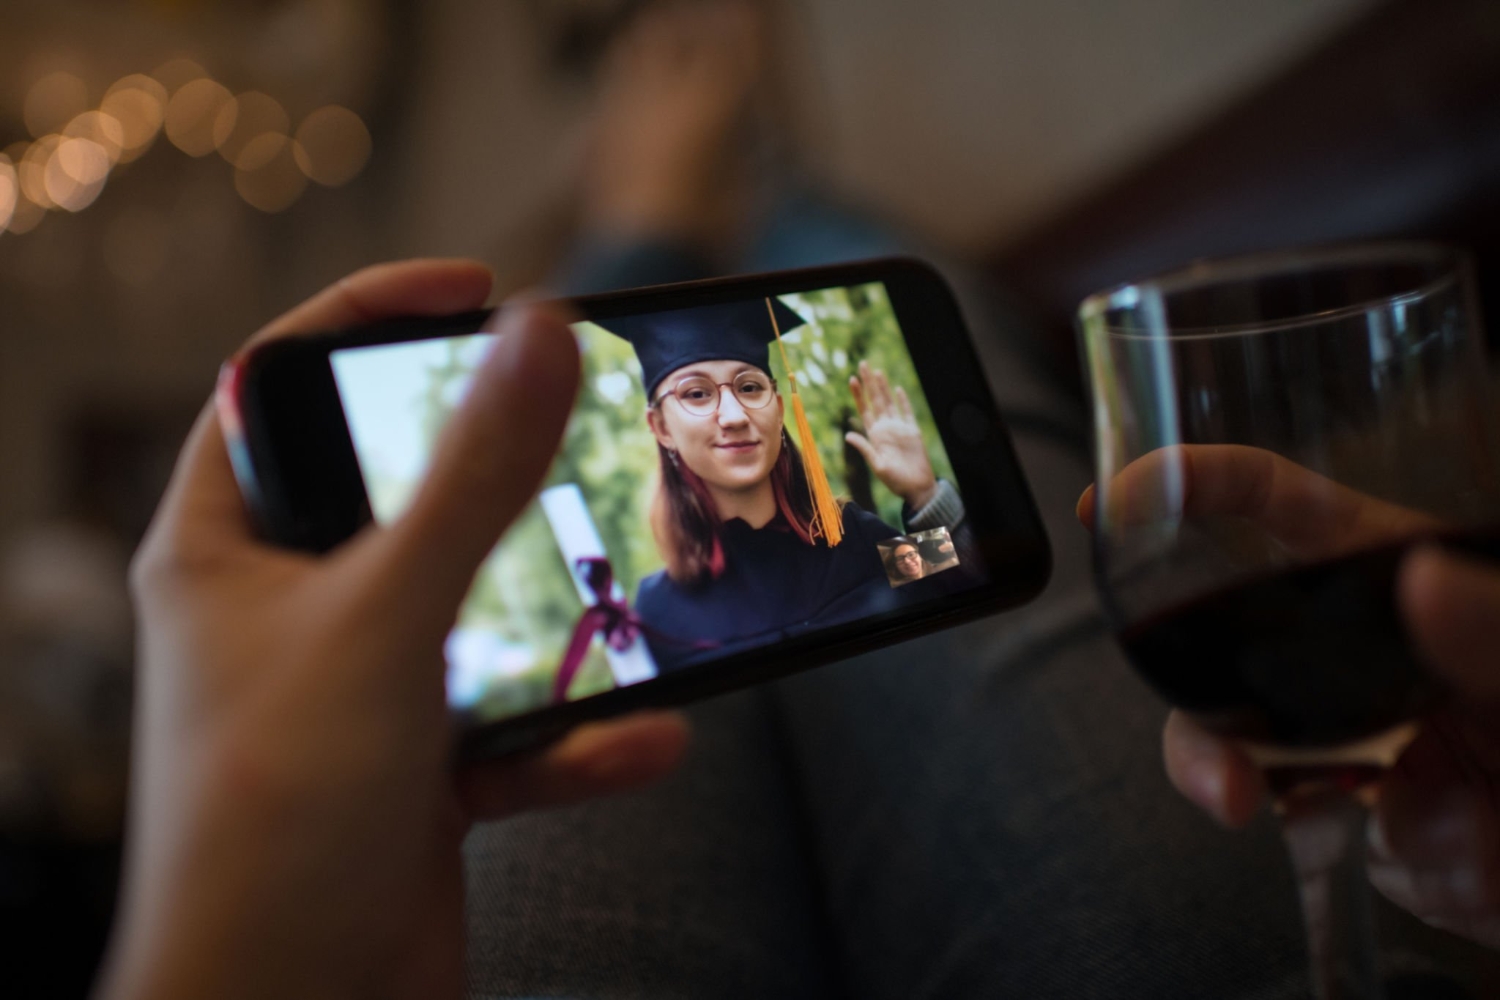 Teenage girl wearing graduation gown and cap greeting her relative or friend on video call